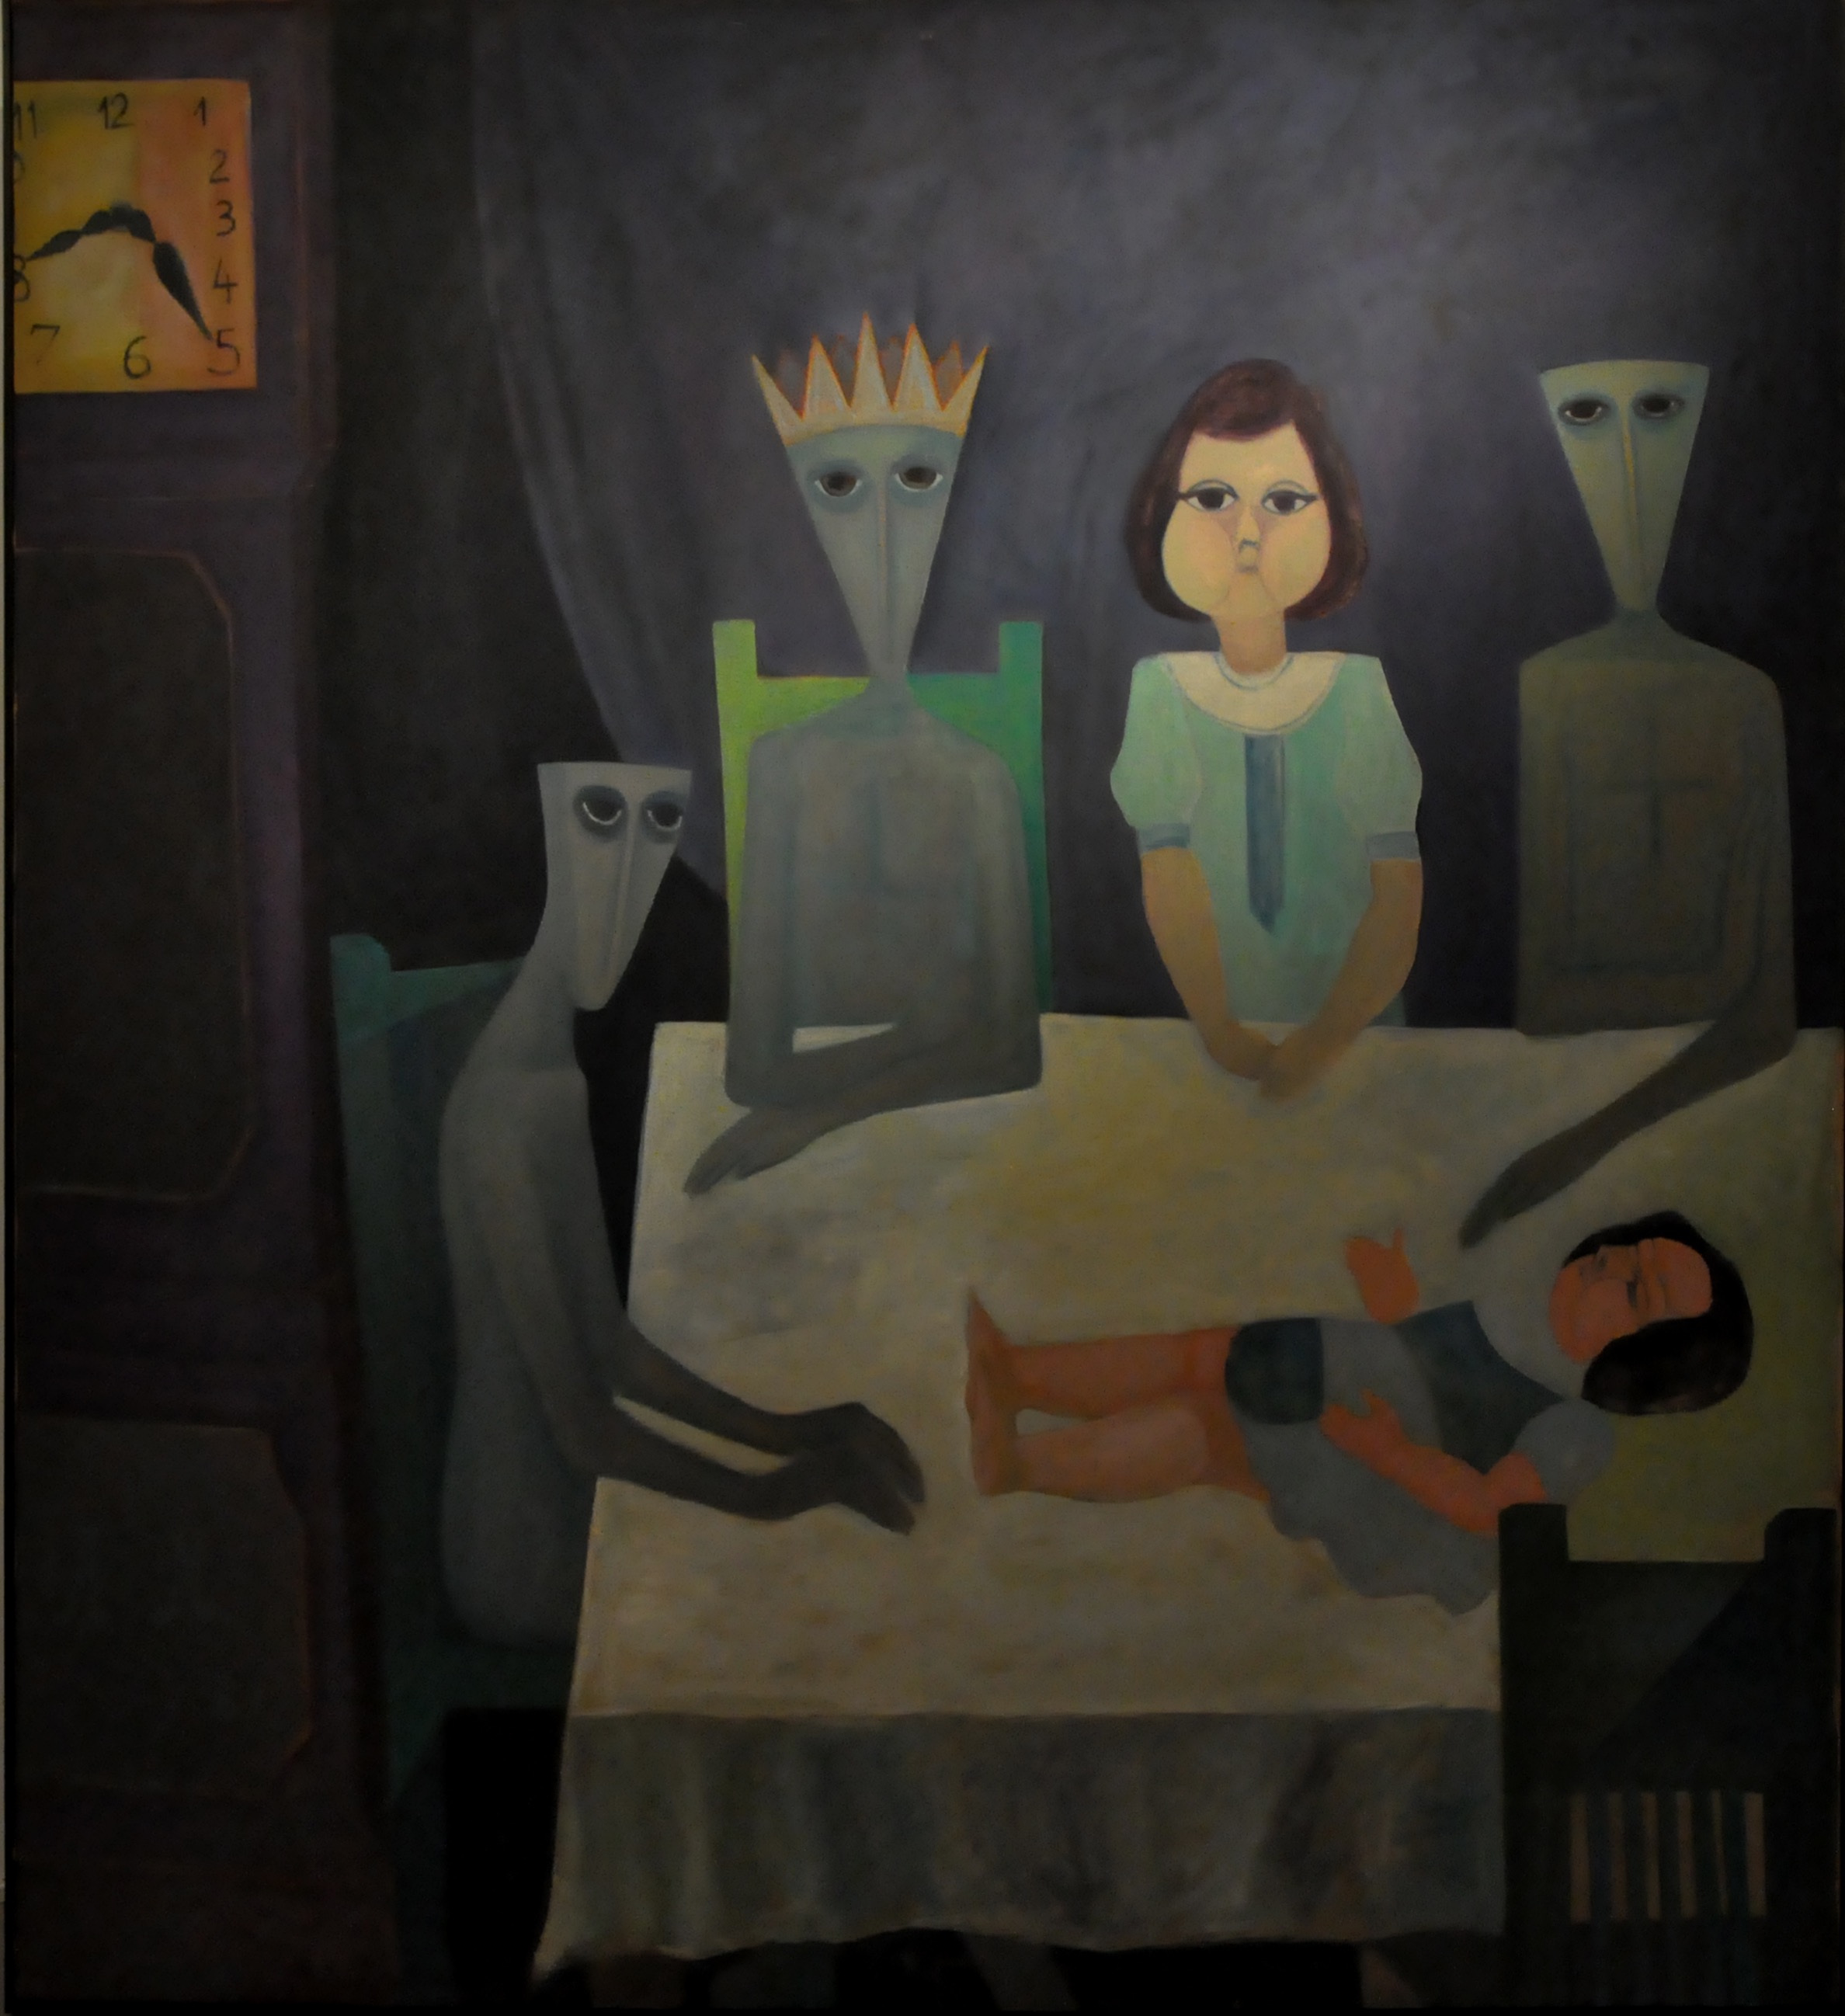  Ahmed Morsi, The Family, 1968, Oil on canvas, 200 x 200 cm, Mathaf:&nbsp;Arab Museum of Modern Art Collection. 